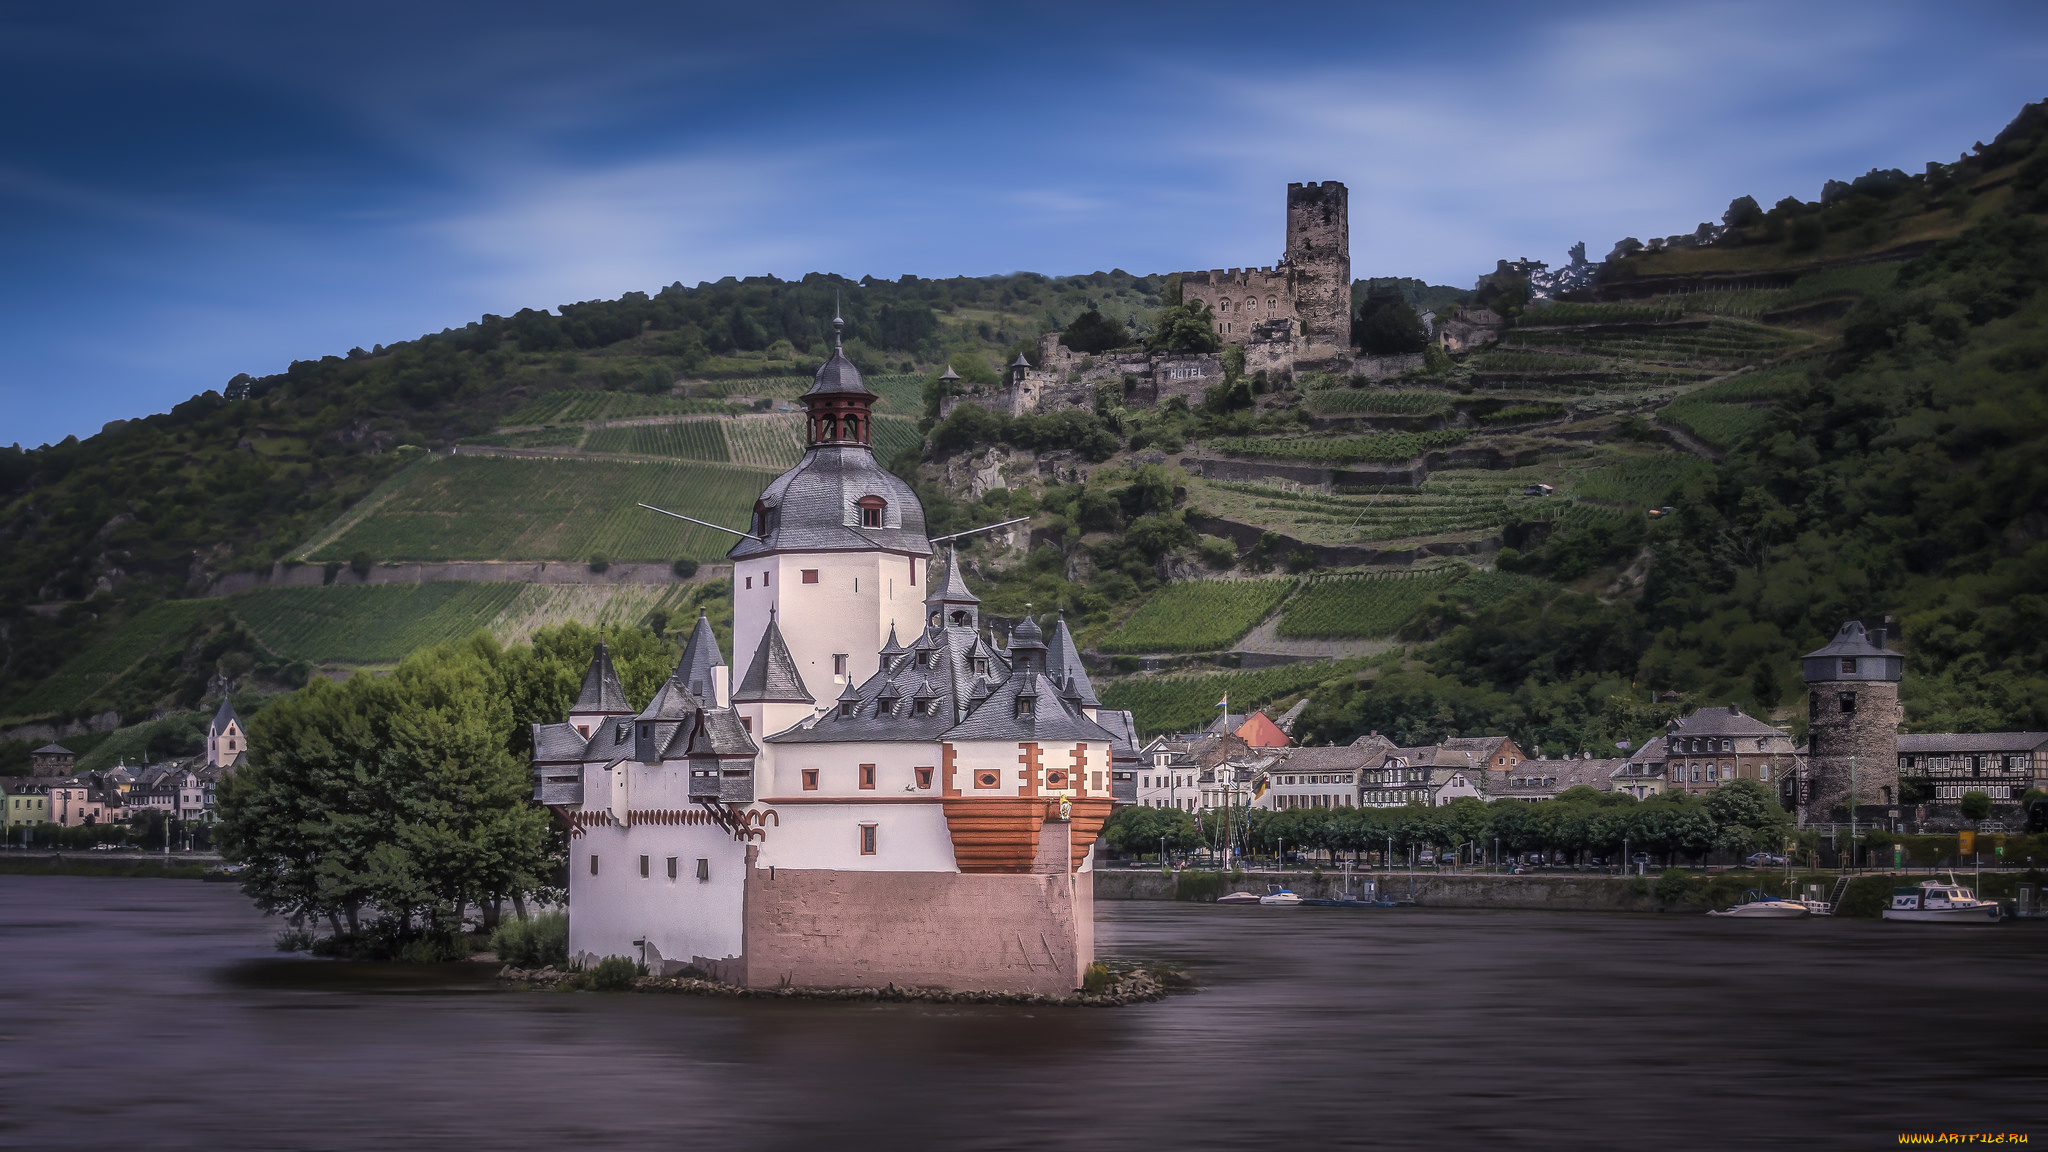 castle, pfalzgrafenstein, with, castle, gutenfels, in, the, background, at, the, town, of, kaub, in, germany, города, замки, германии, река, островок, замок